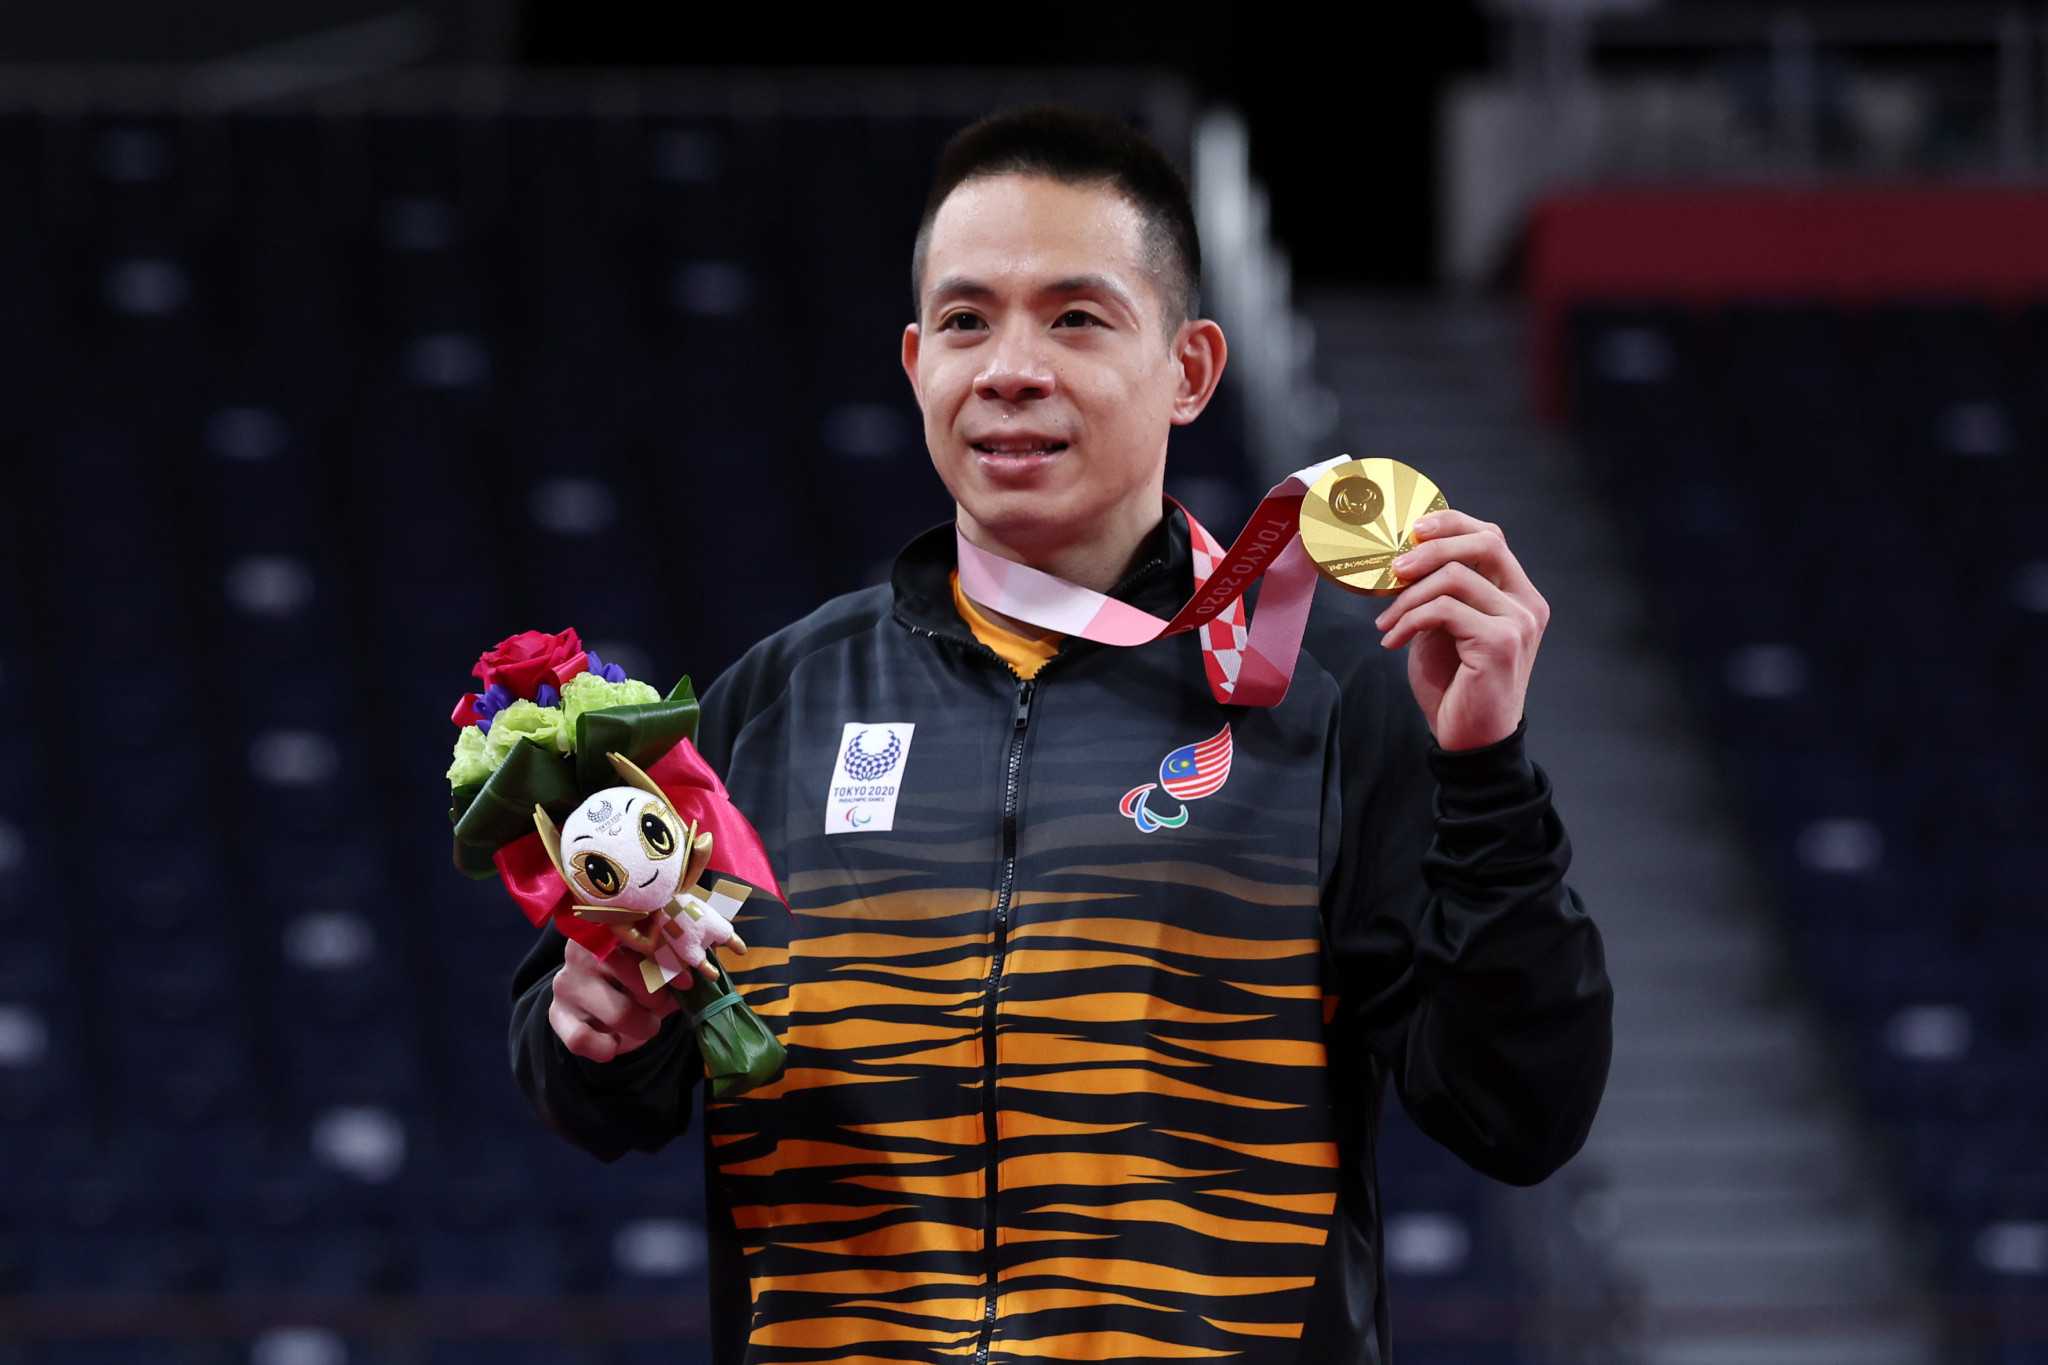 Malaysia's Para badminton gold medallist Cheah Liek Hou has set his sights on the SU5 men's singles world number one spot for 2022 ©Getty Images